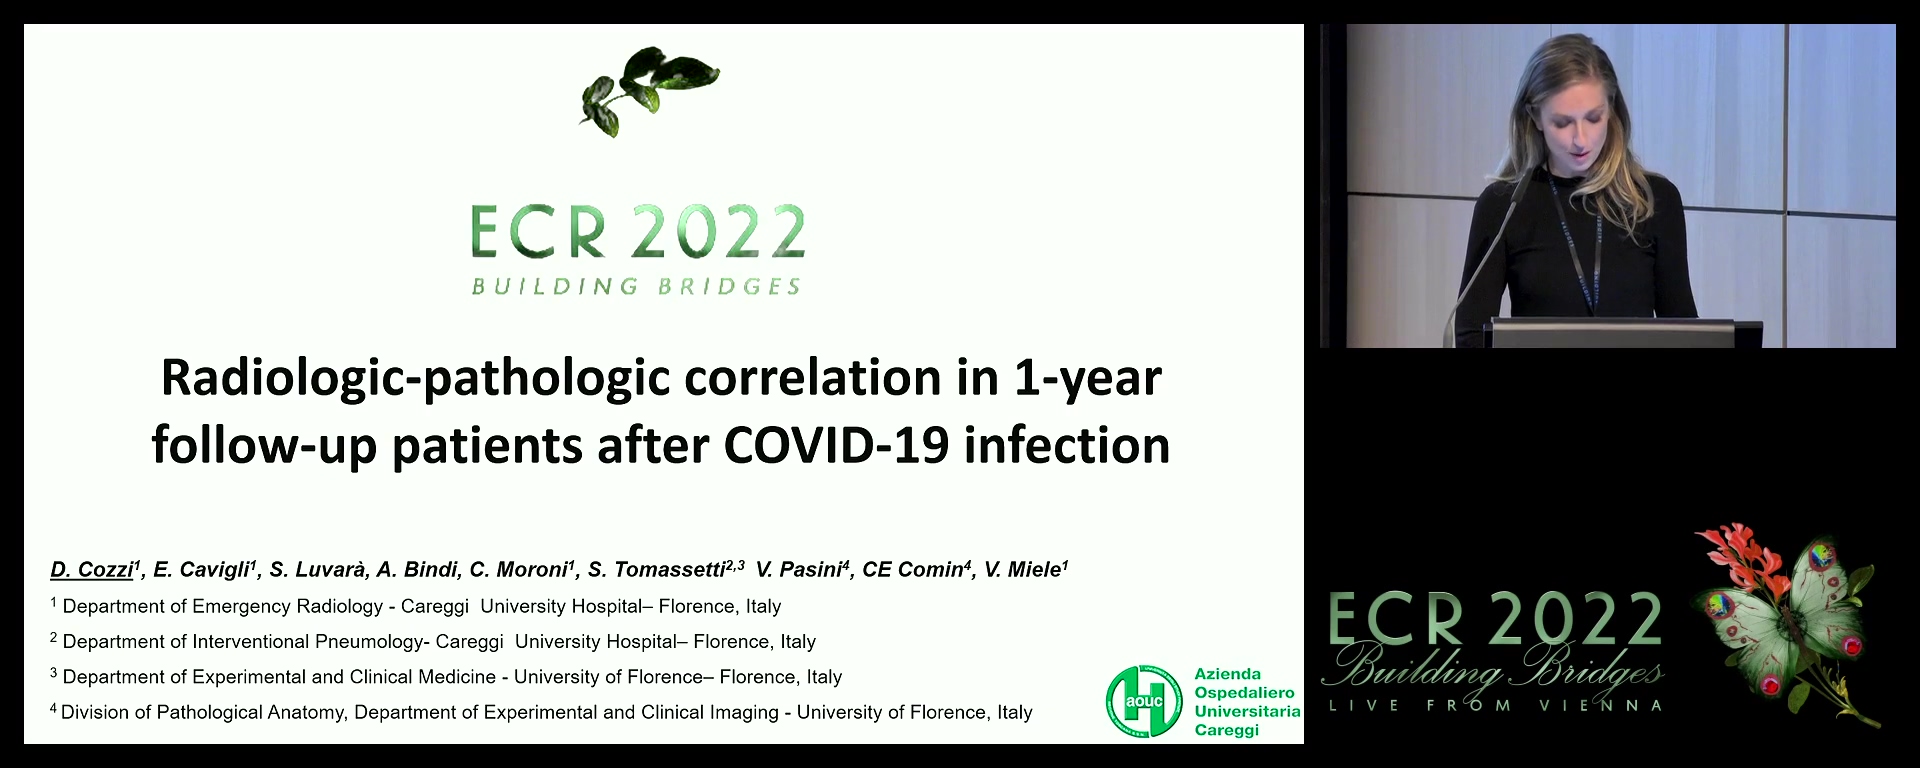 Radiologic-pathologic correlation in 1-year follow-up patients after COVID-19 infection